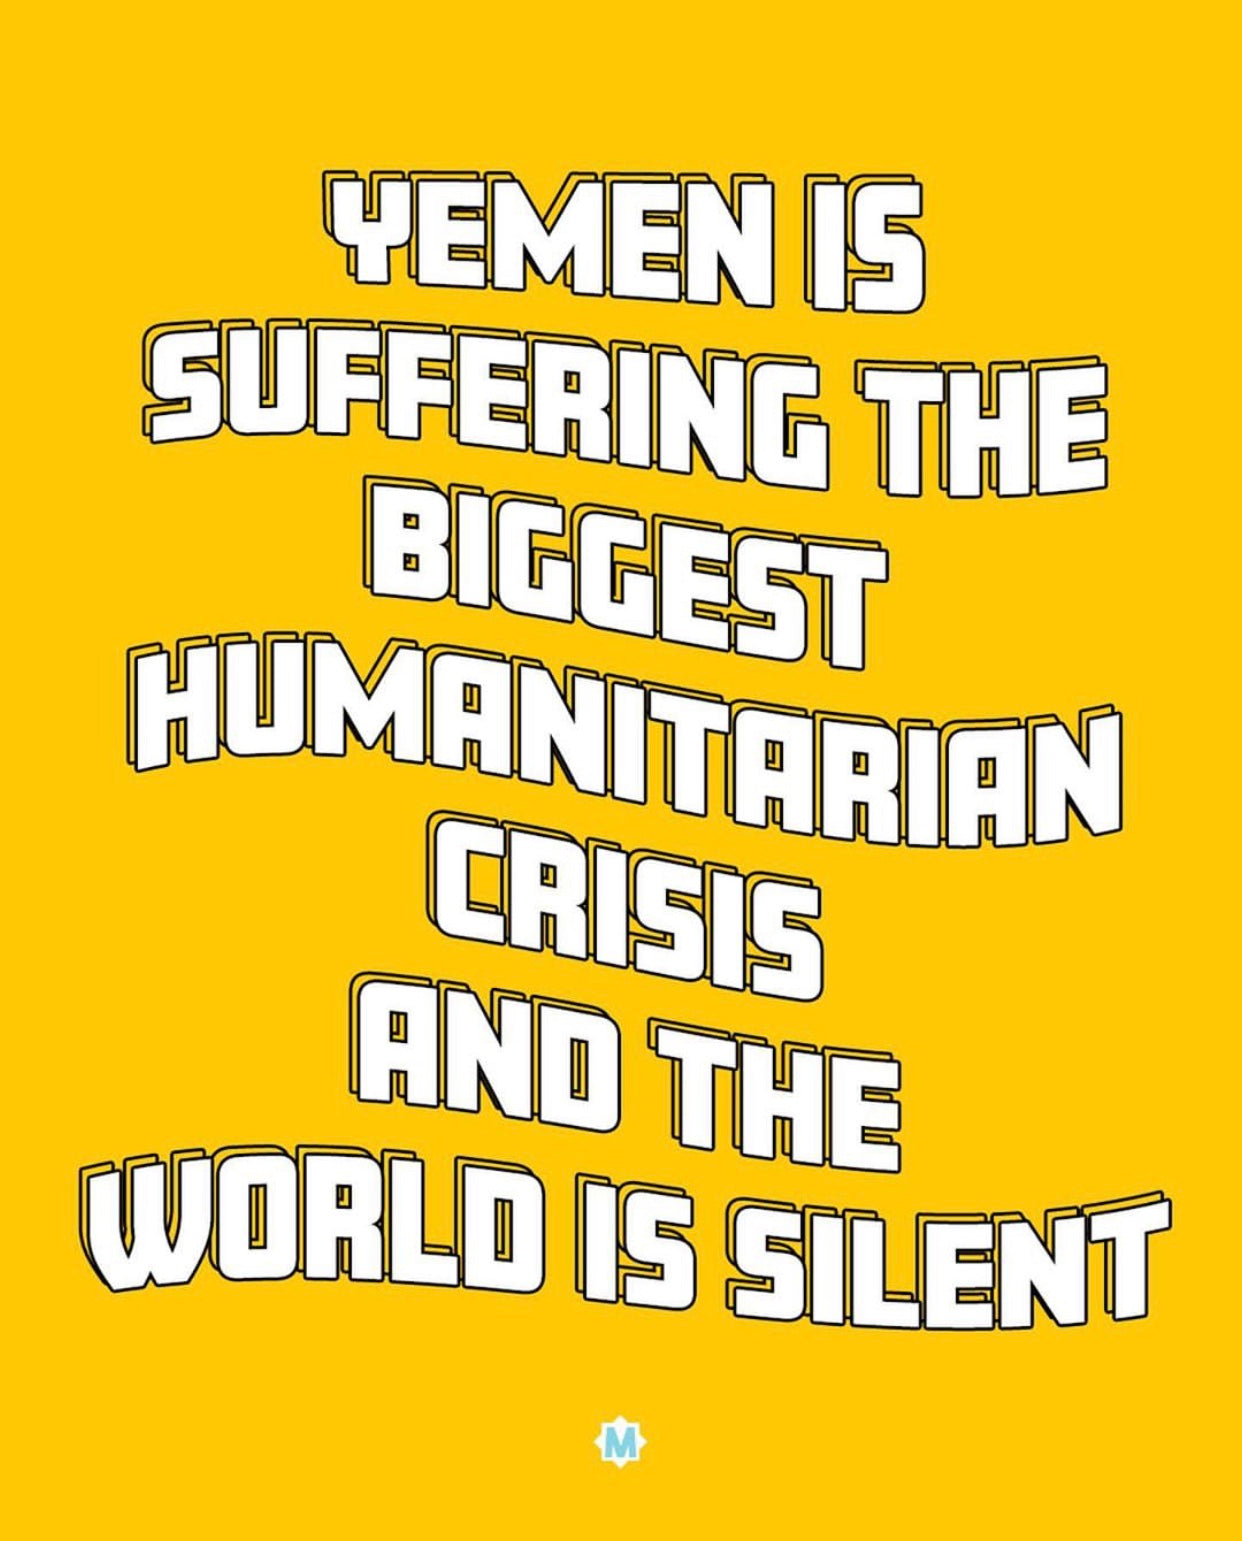 Yemen Is Suffering and the World Is Silent